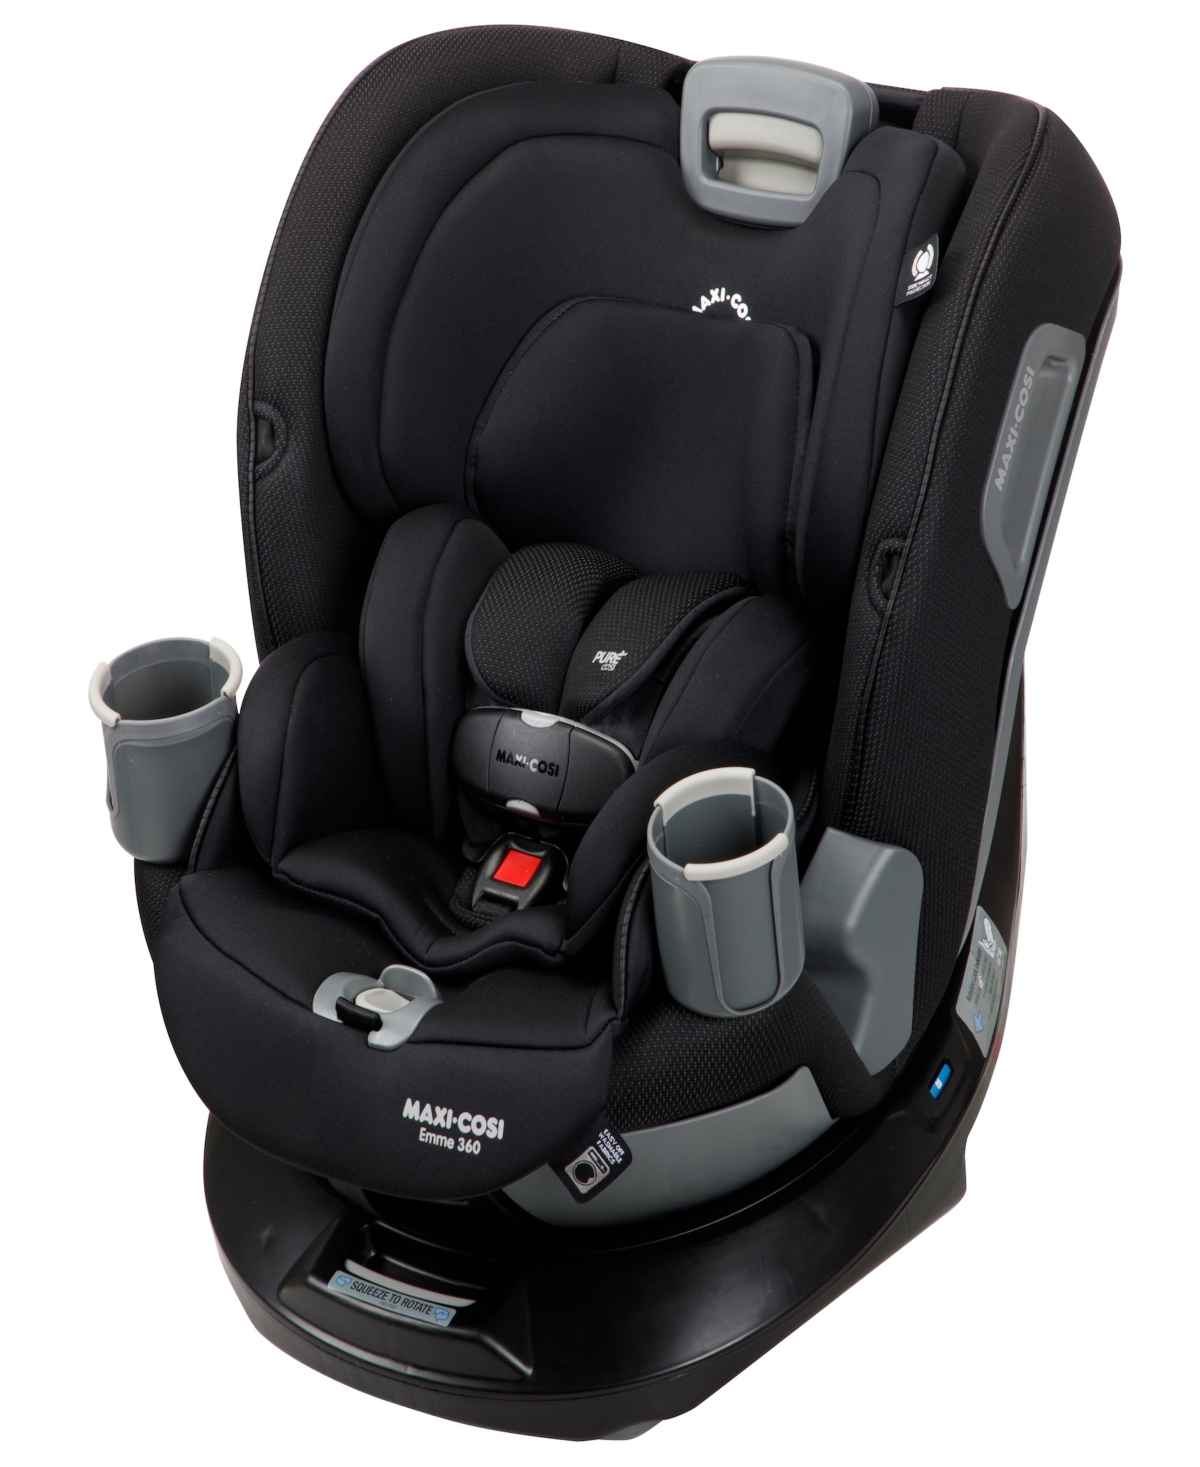 Maxi-cosi Baby Girls And Boys Emme Convertible Car Seat In Midnight Black